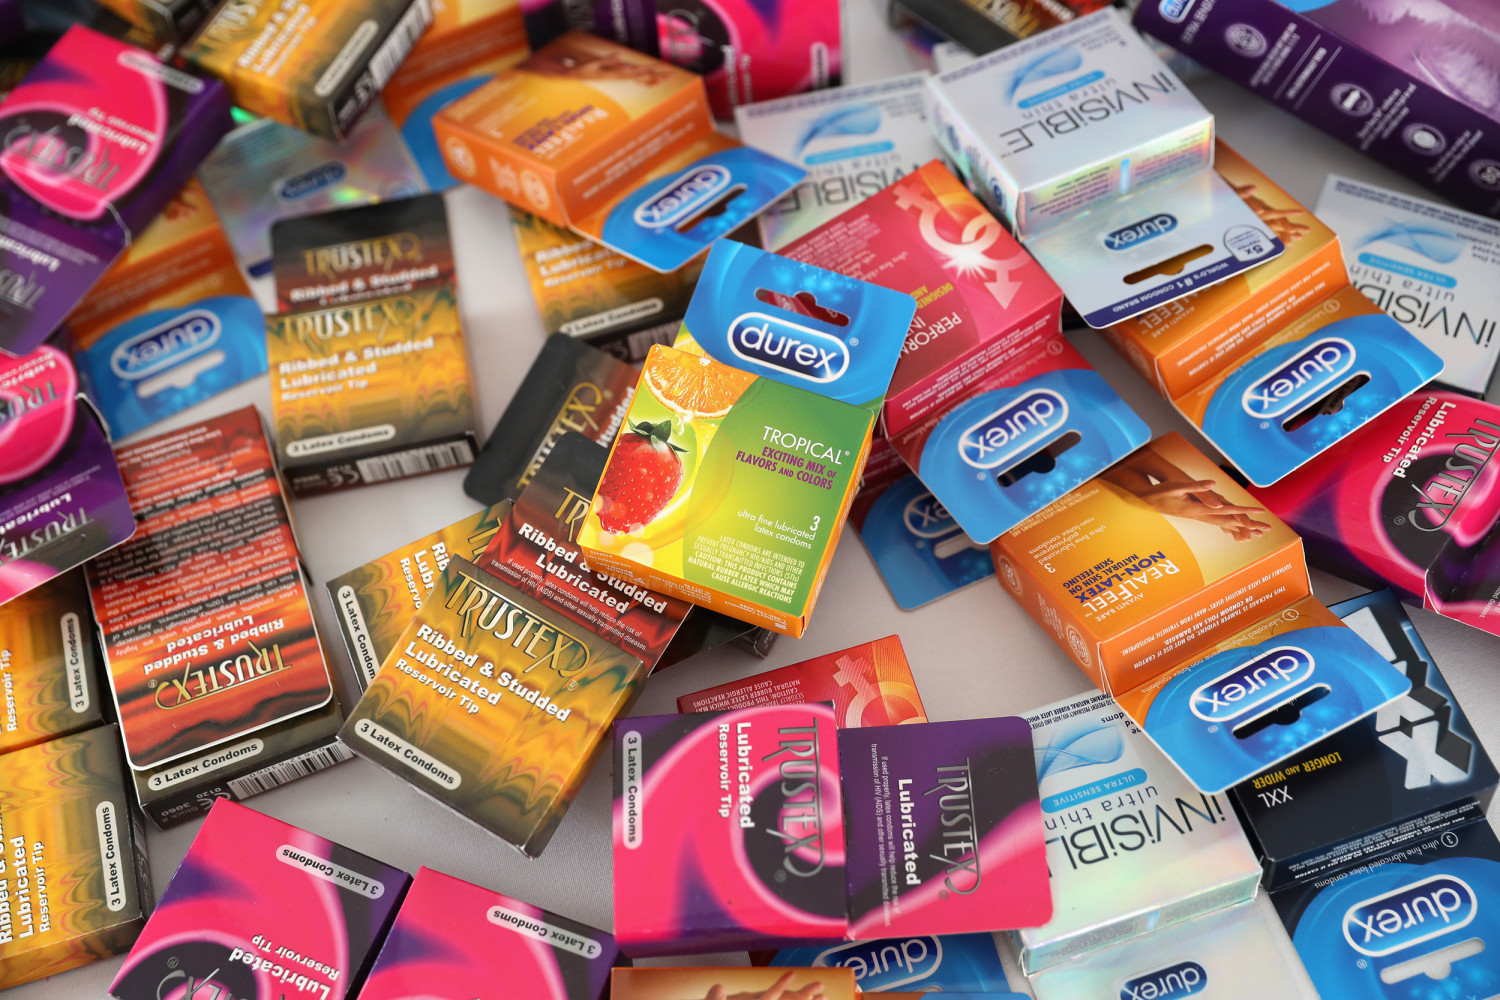 Stealthing Victims Describe Partners Removing Condoms During Sex Without Consent